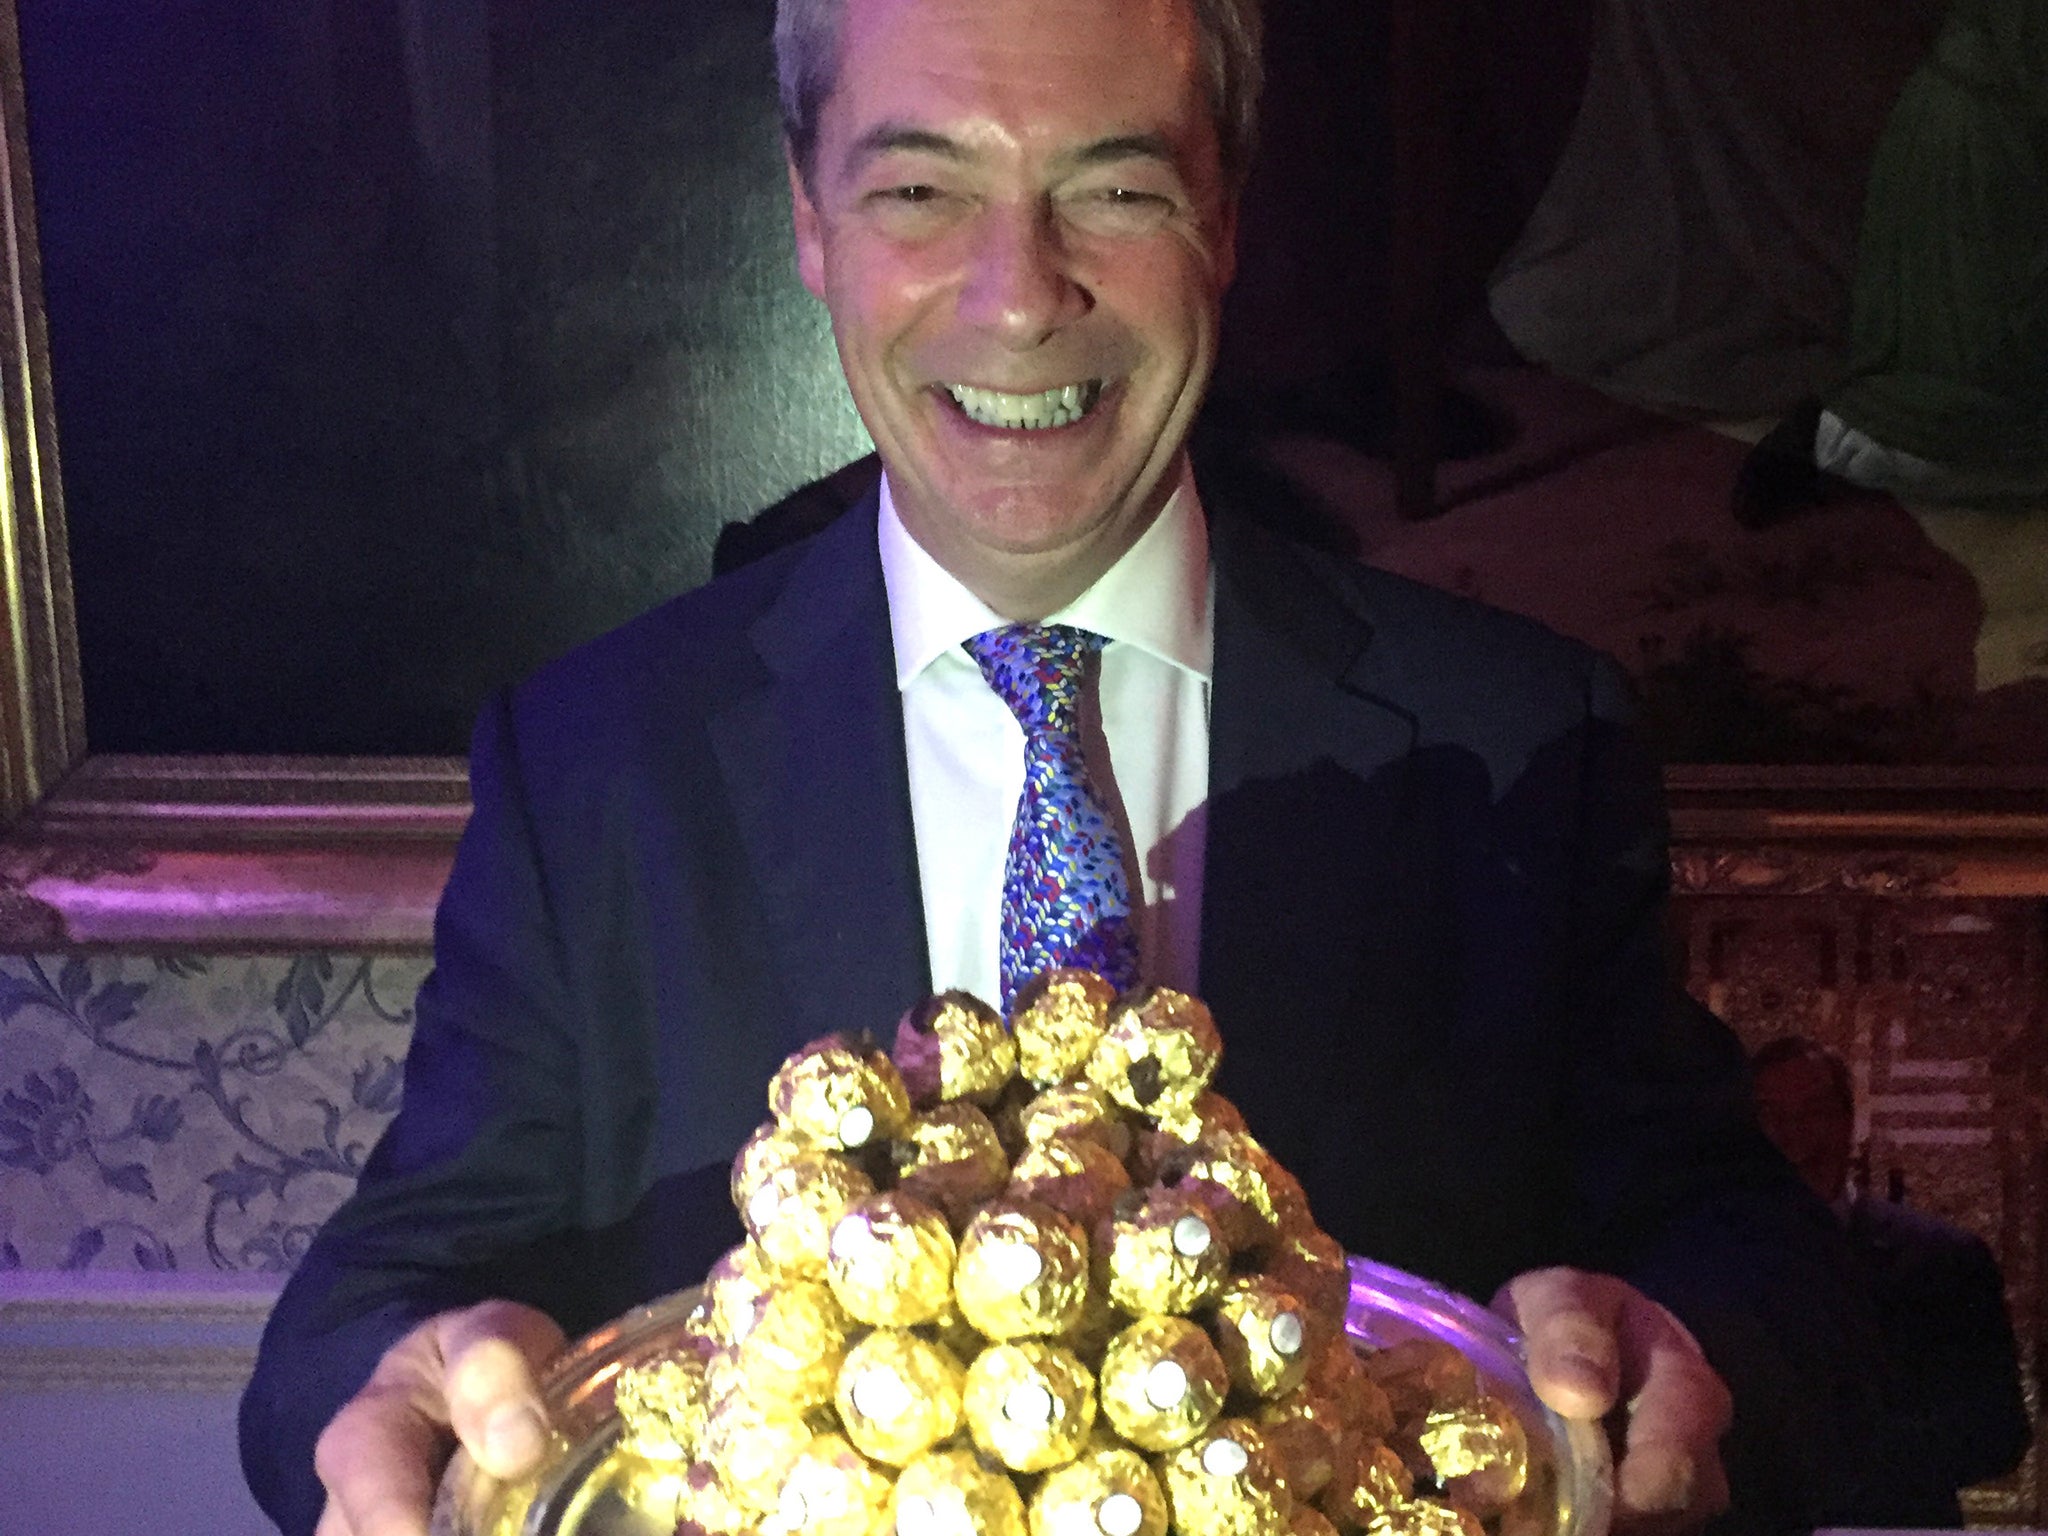 Nigel Farage is presented with a tray of Ferrero Rocher chocolates at an event to thank him for his contribution to Brexit